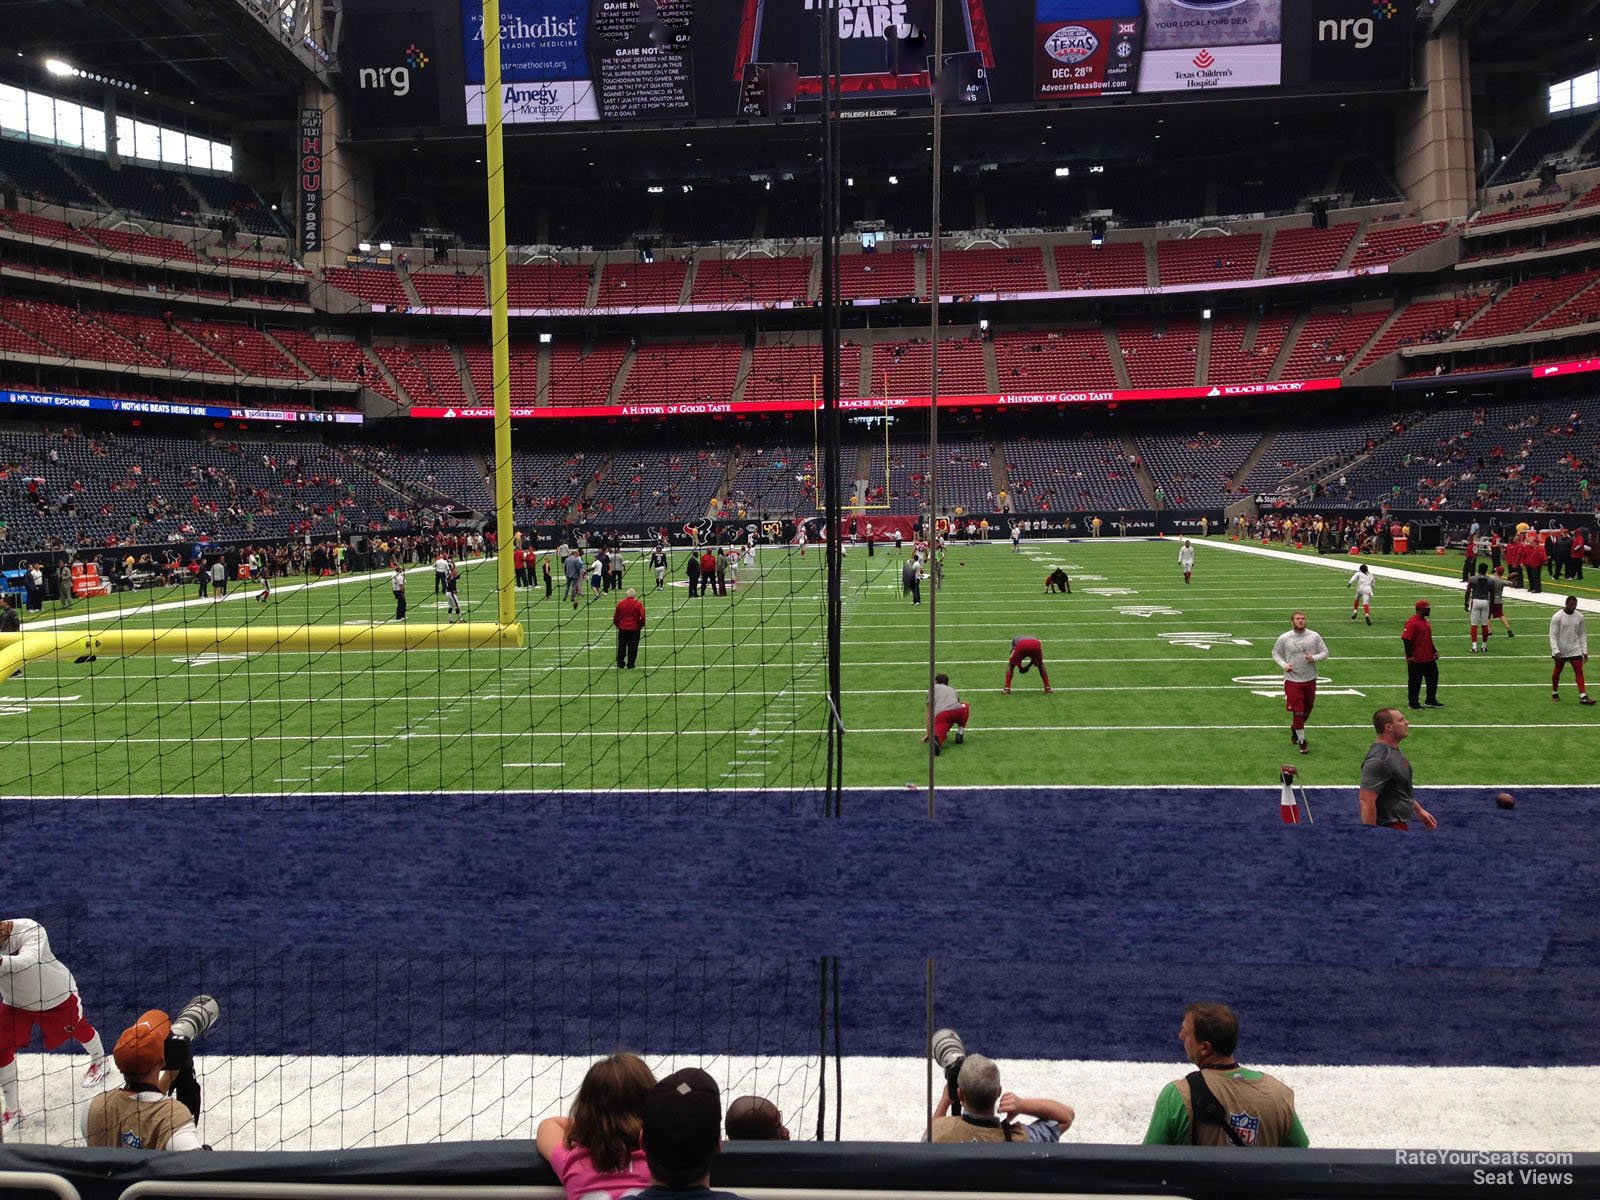 section 136, row c seat view  for football - nrg stadium